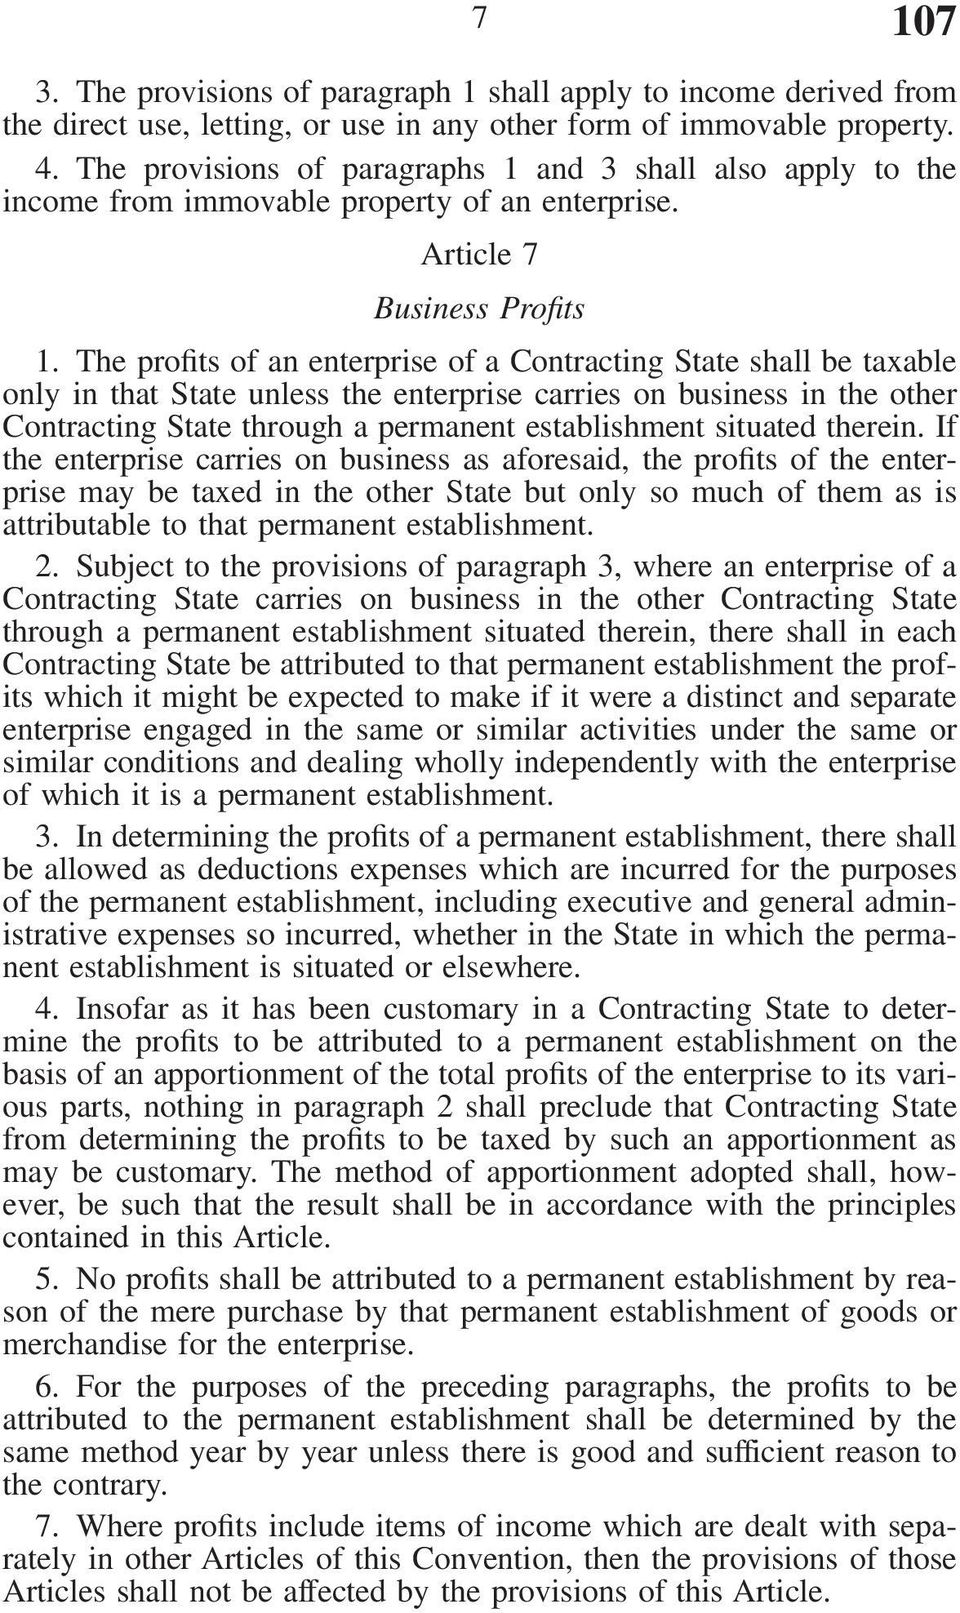 The profits of an enterprise of a Contracting State shall be taxable only in that State unless the enterprise carries on business in the other Contracting State through a permanent establishment